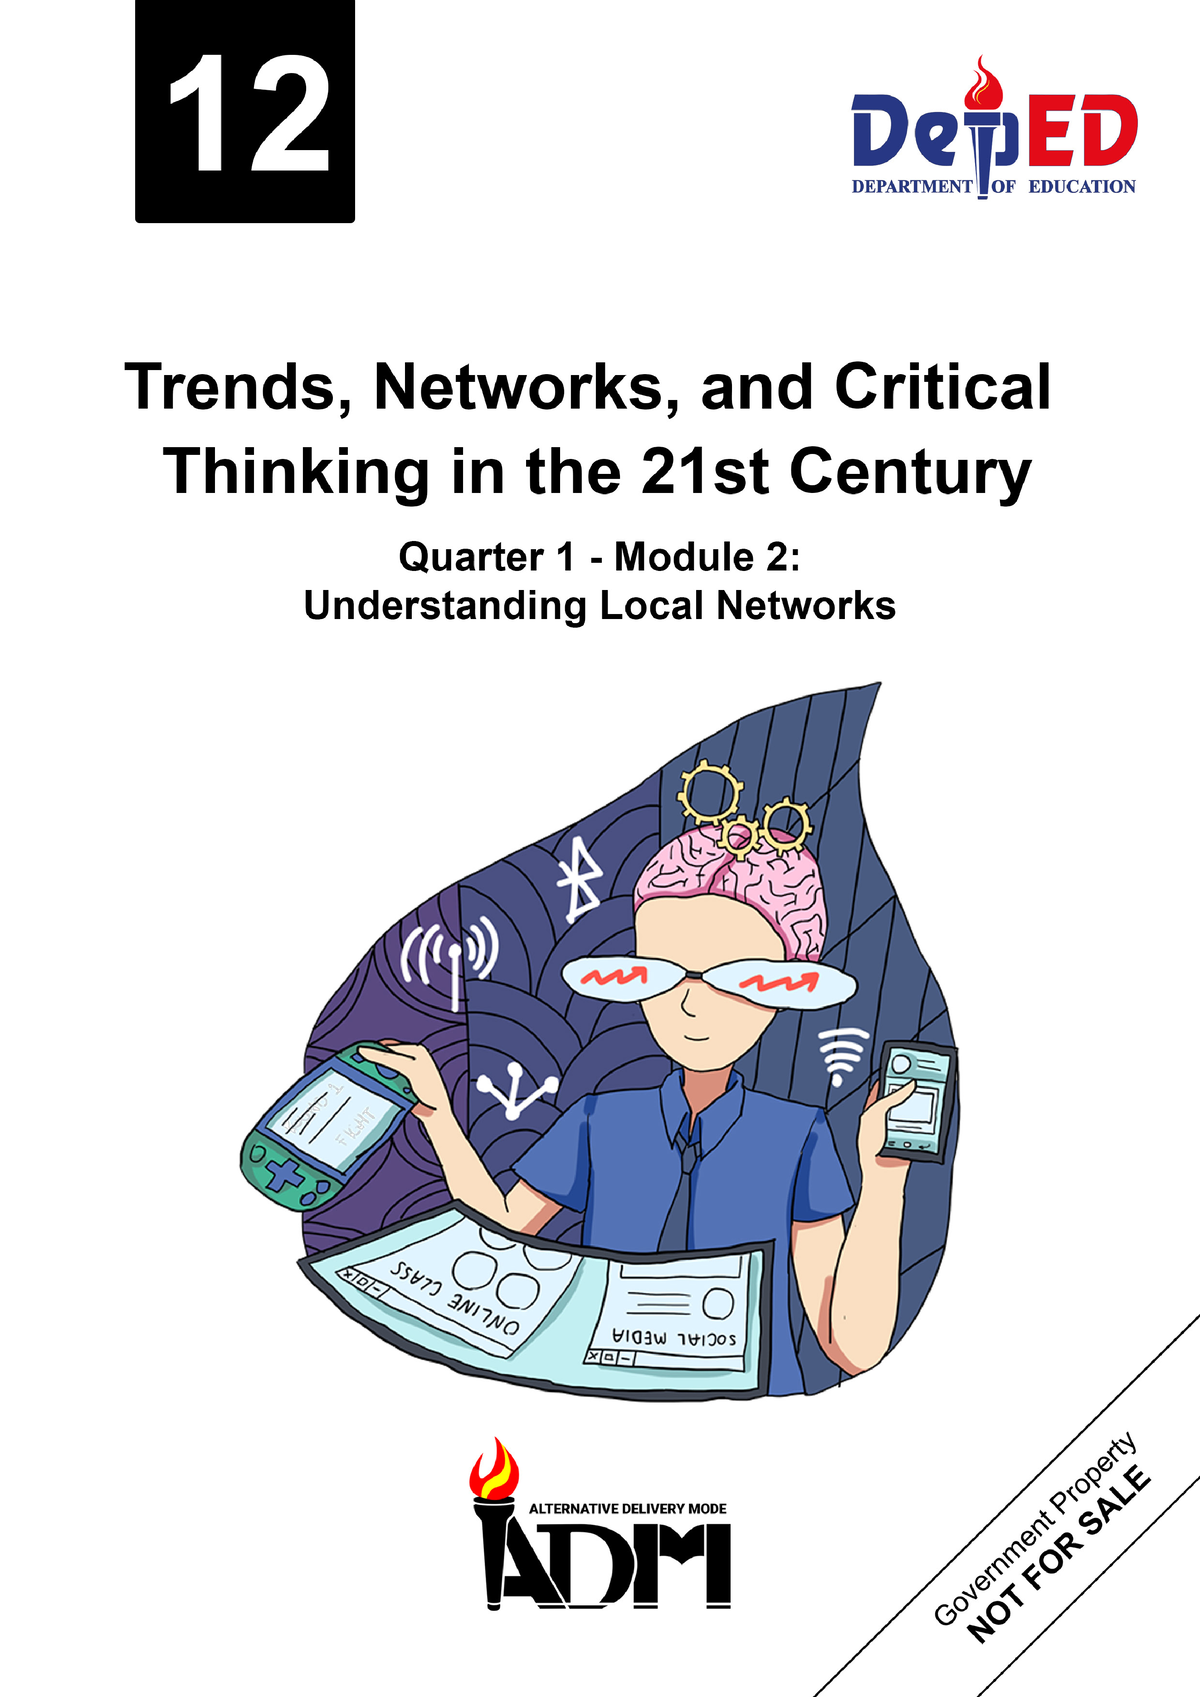 trends networks and critical thinking quarter 2 module 4